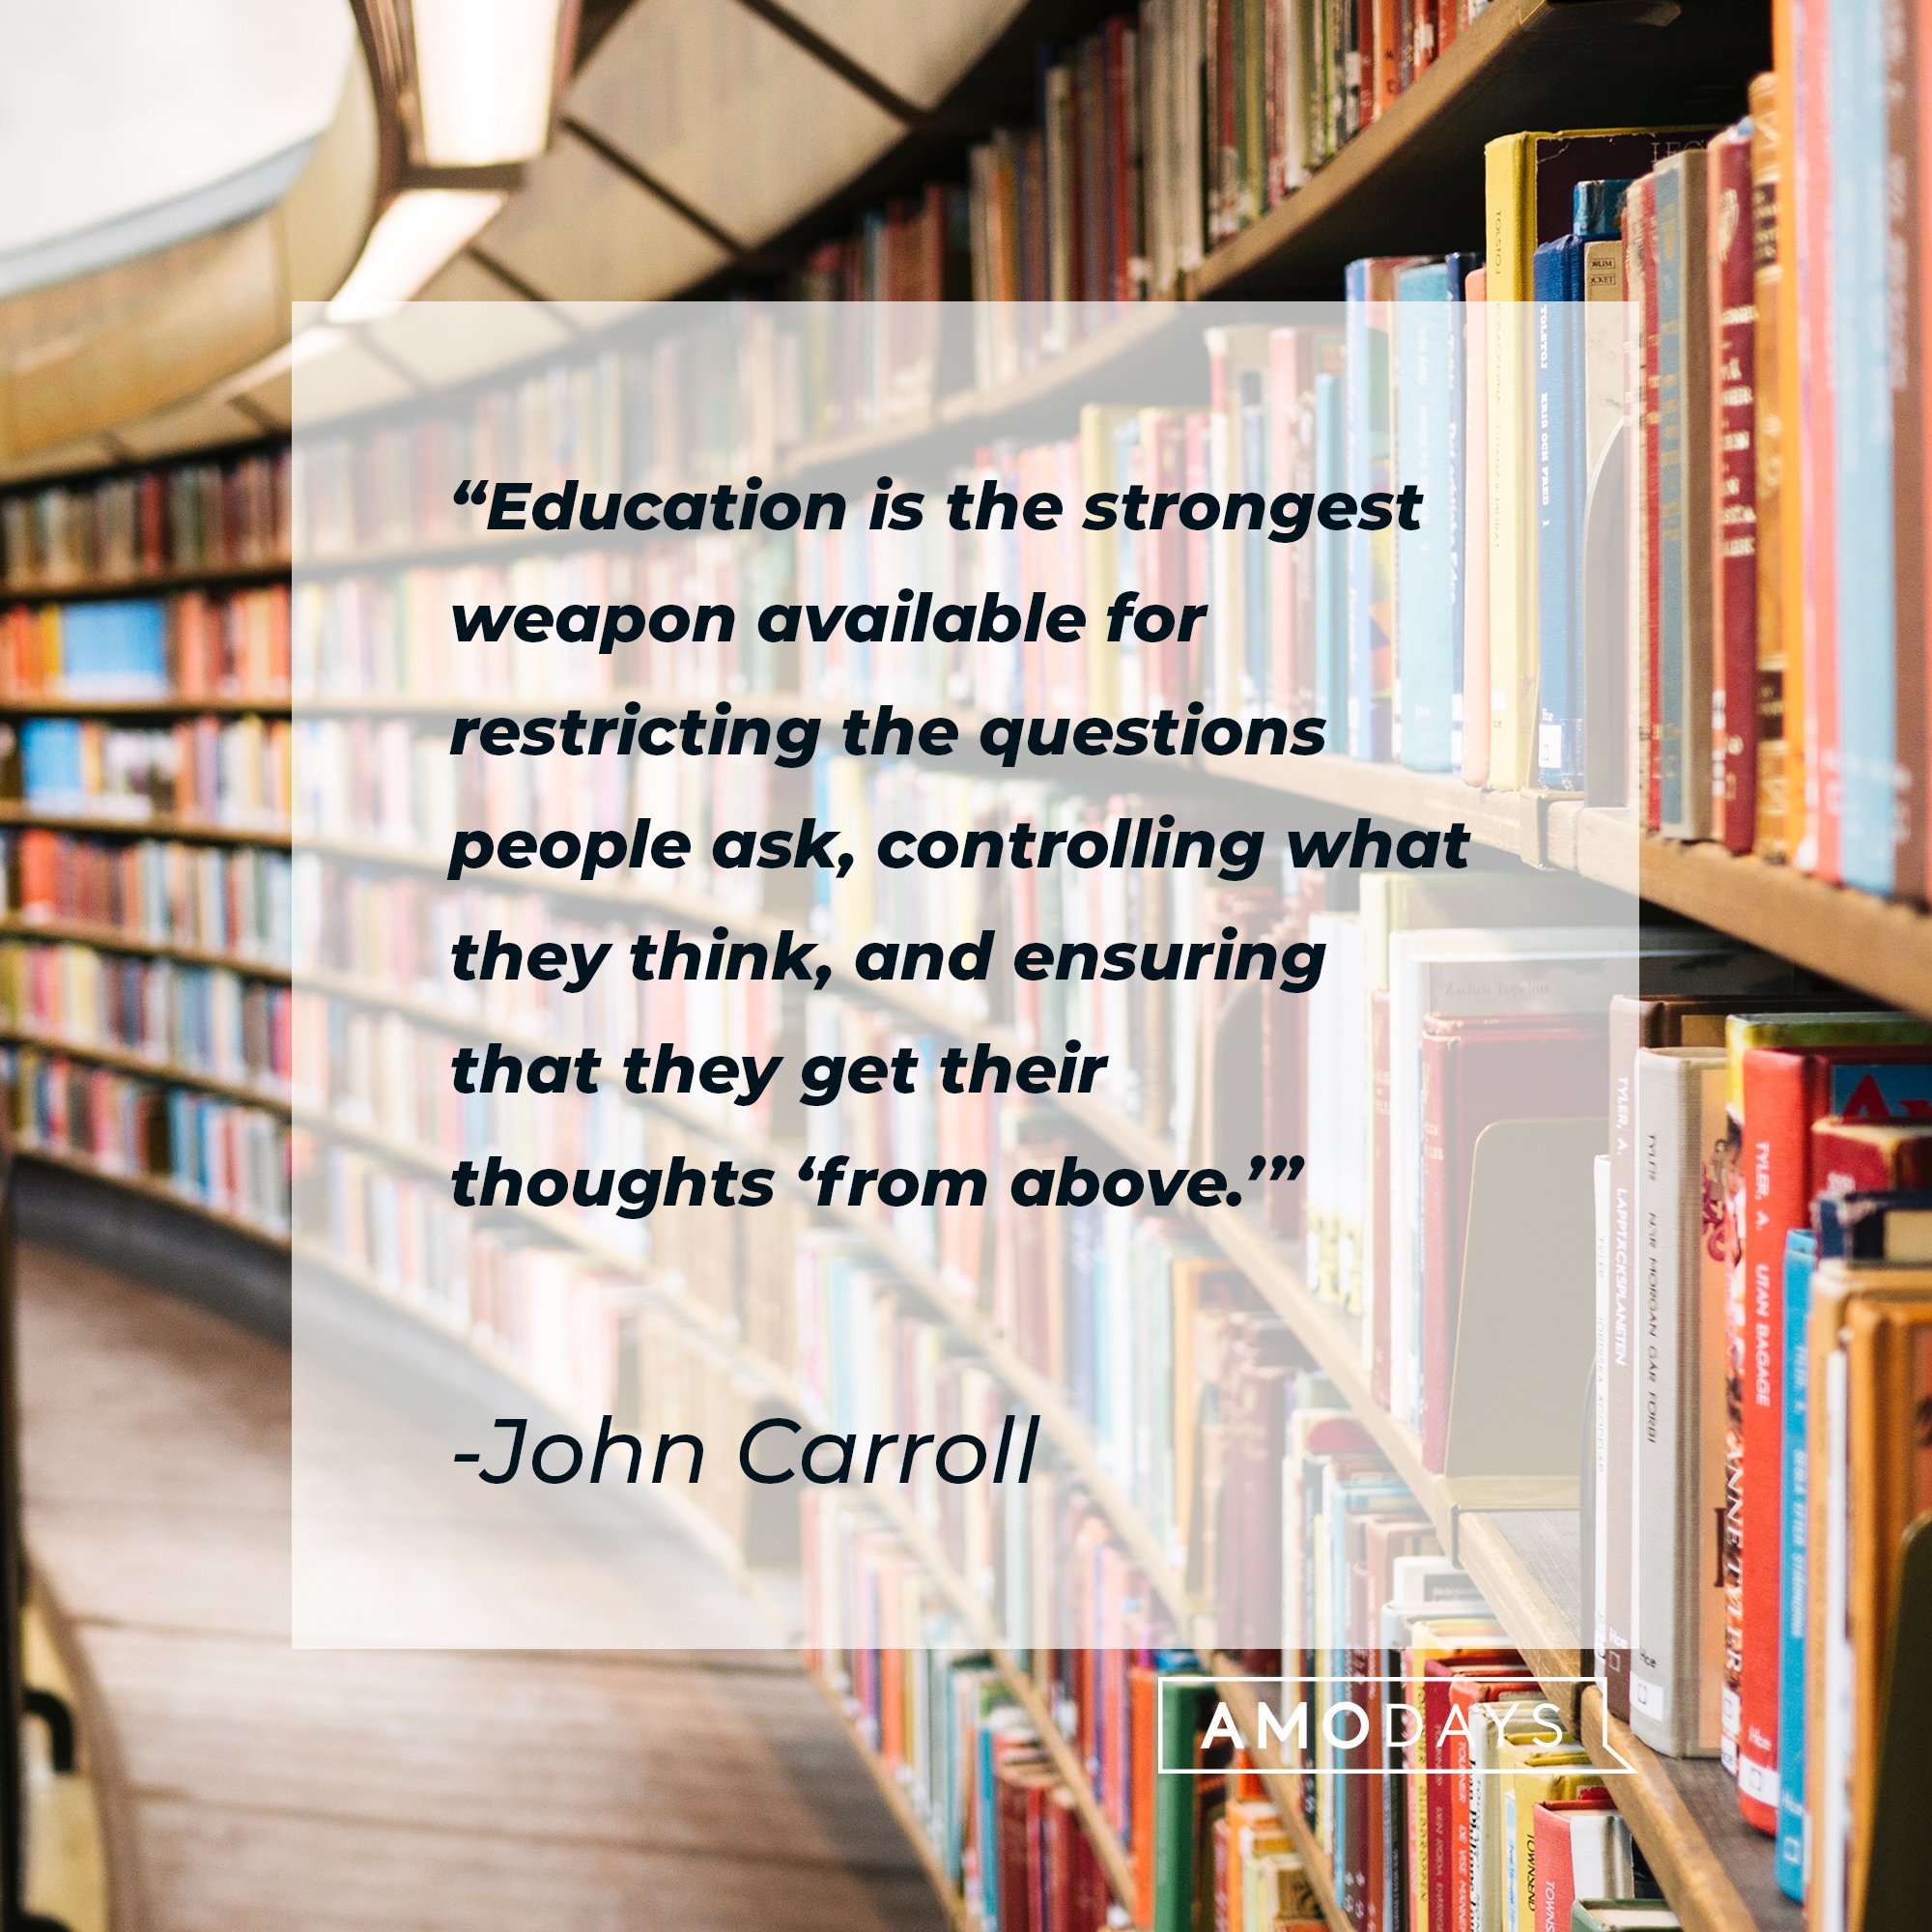 John Carroll's quote: "Education is the strongest weapon available for restricting the questions people ask, controlling what they think, and ensuring that they get their thoughts 'from above.'" | Image: AmoDays